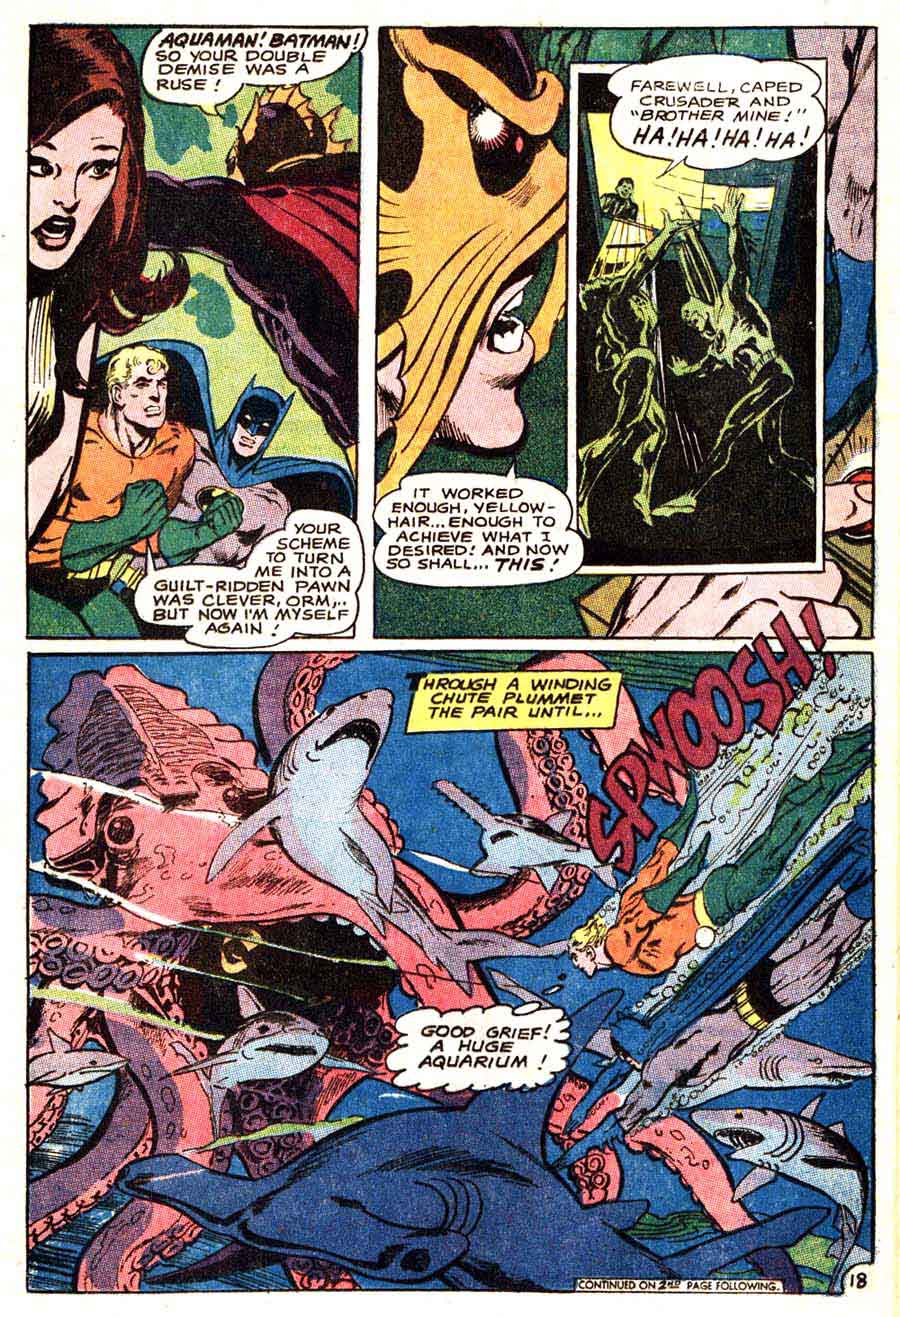 Brave and the Bold v1 #82 dc comic book page art by Neal Adams